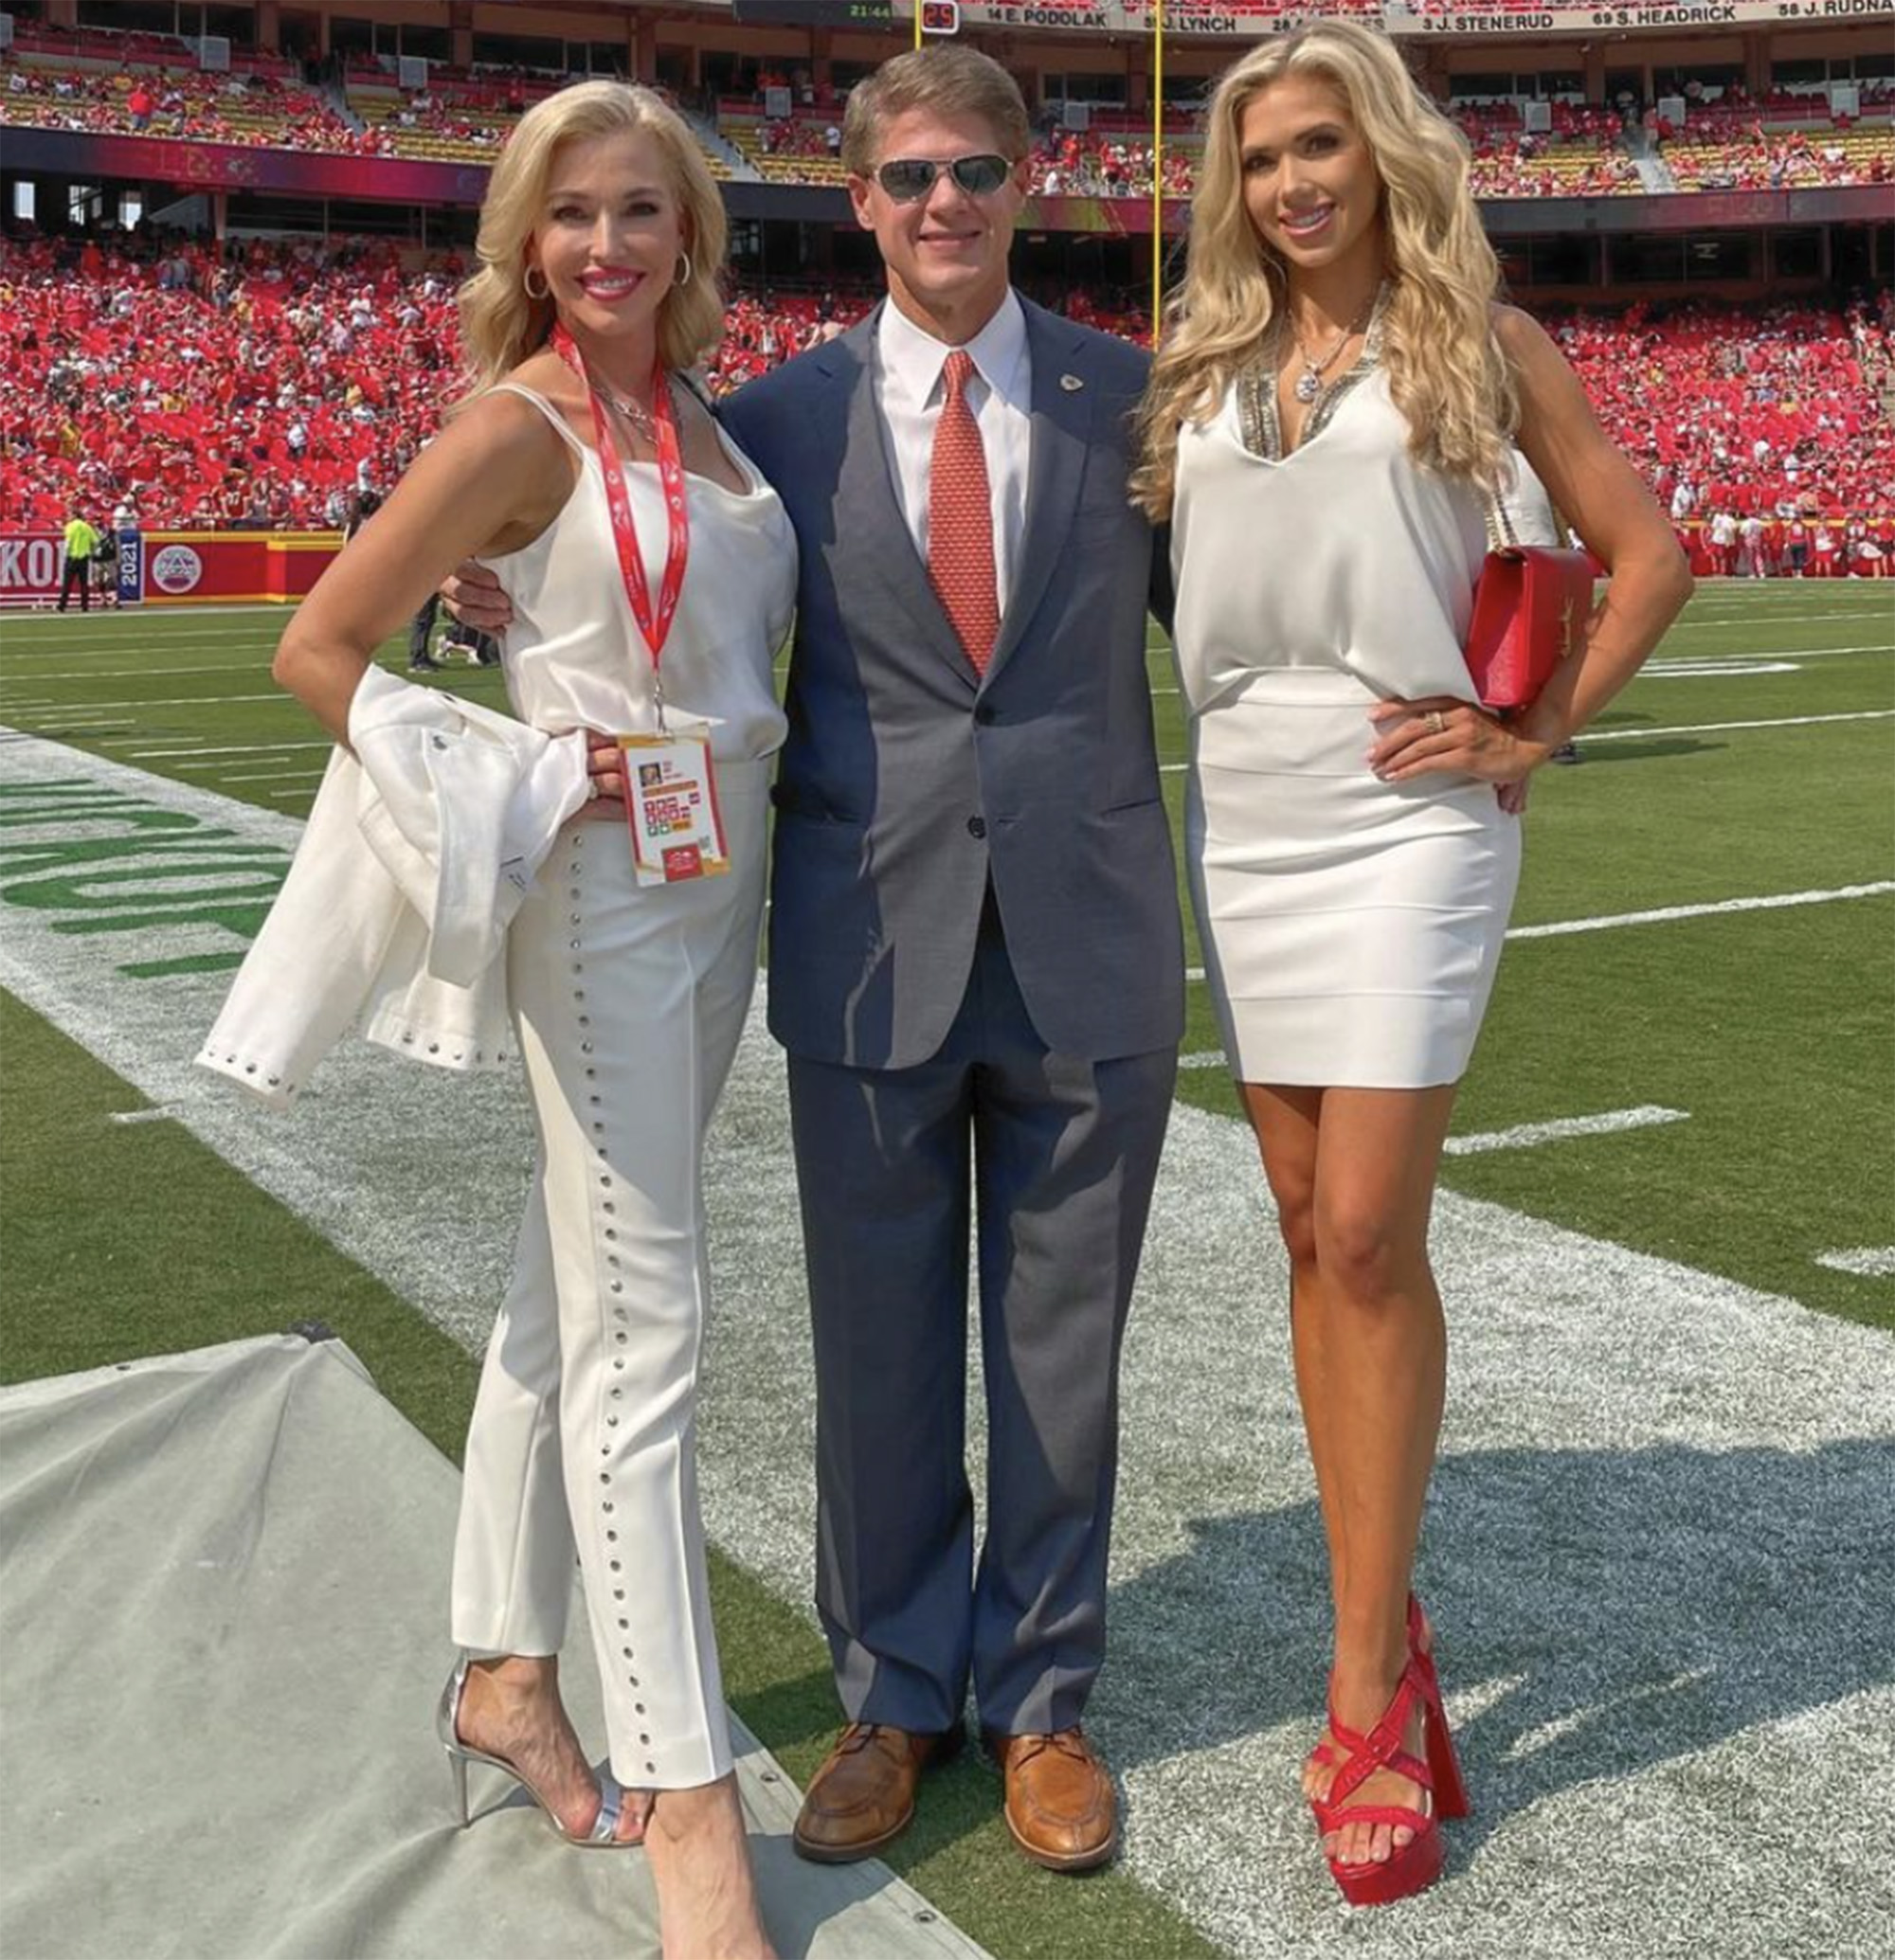 Tavia Hunt, Clark Hunt, and Gracie Hunt during a Chiefs game at Arrowhead.